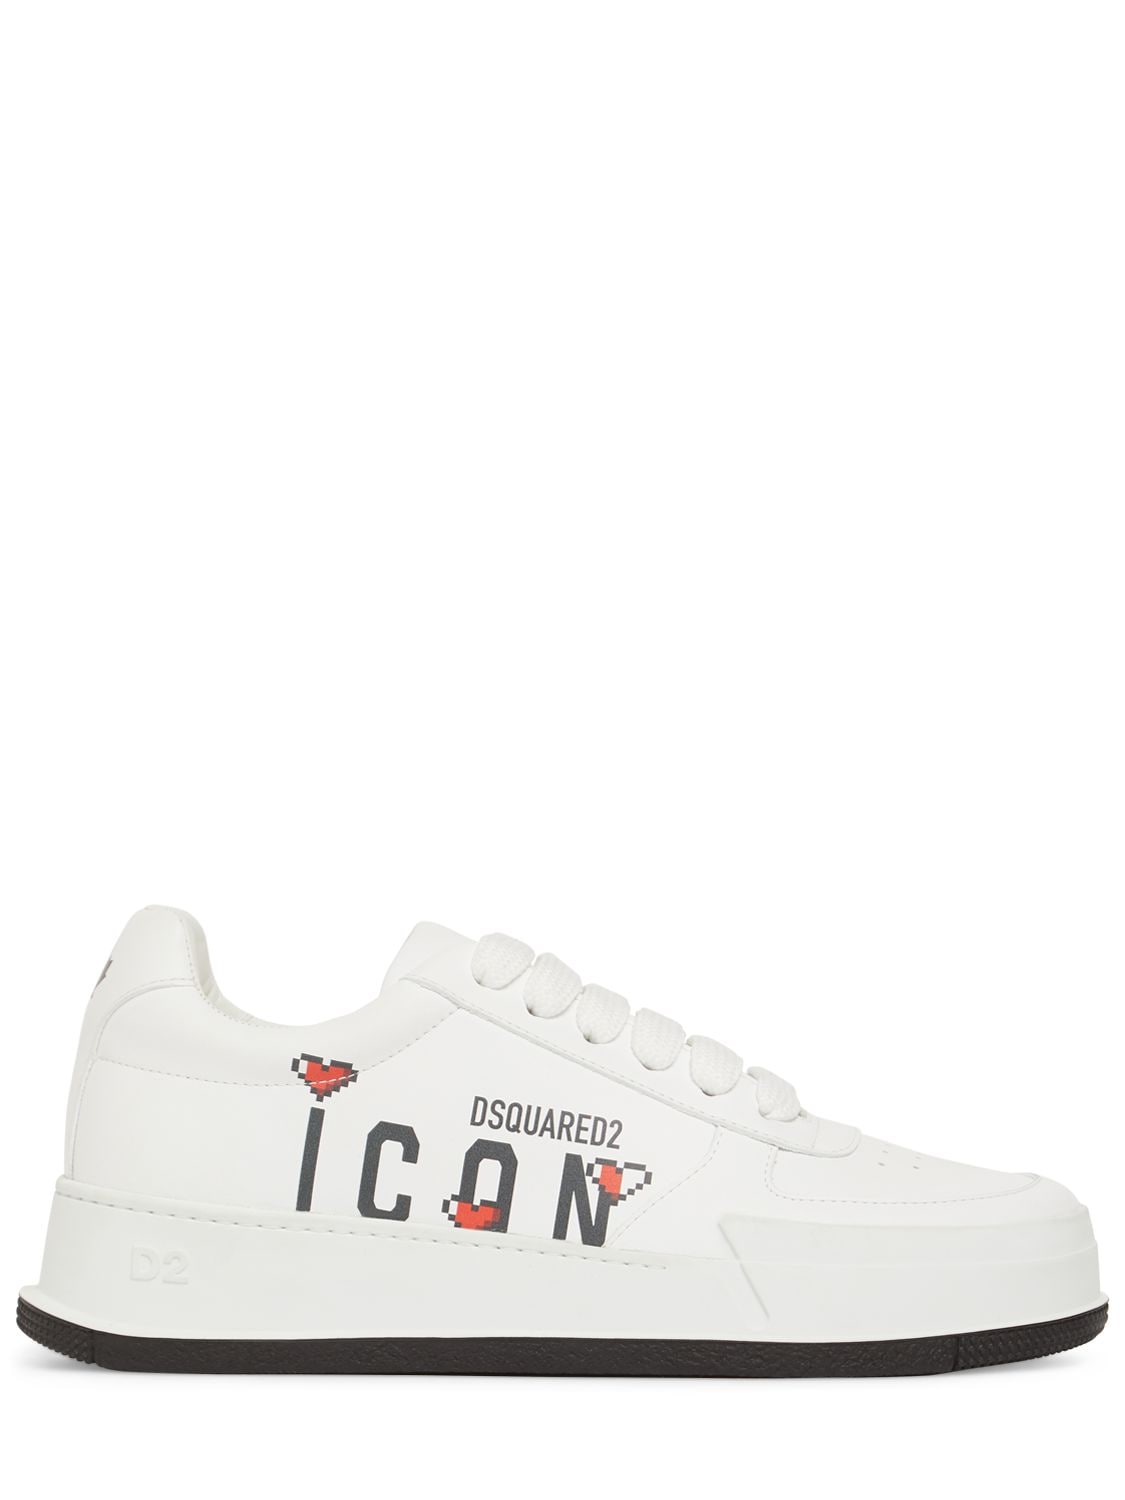 Icon Leather Low Top Sneakers - DSQUARED2 - Modalova